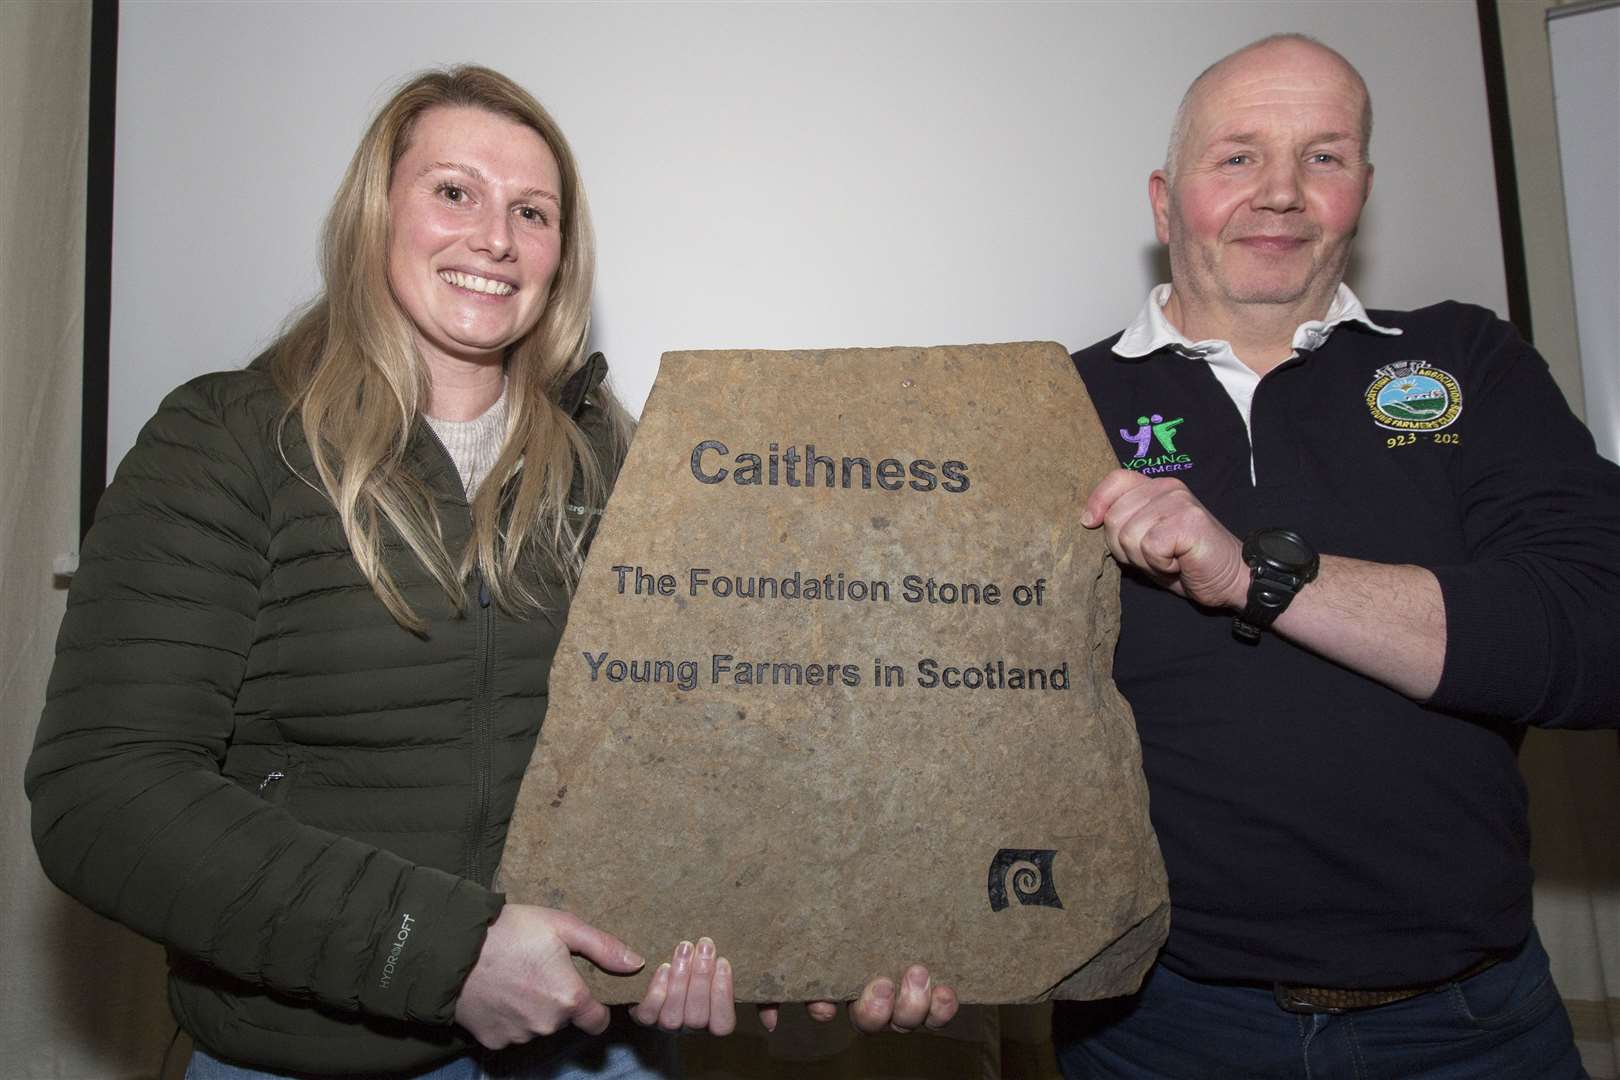 Sandy Douglas, chairman of the Caithness Young Farmers' 100th anniversary committee, hands over an engraved stone to Fiona Swanson, the Scottish Association of Young Farmers Clubs' North Area development officer. The stone came from Sandy's farm at Achnamoine and was then engraved and displayed at the various events during the centenary year. It will be embedded in a wall when the organisation's new headquarters are built at Ingliston, Edinburgh. Picture: Robert MacDonald / Northern Studios